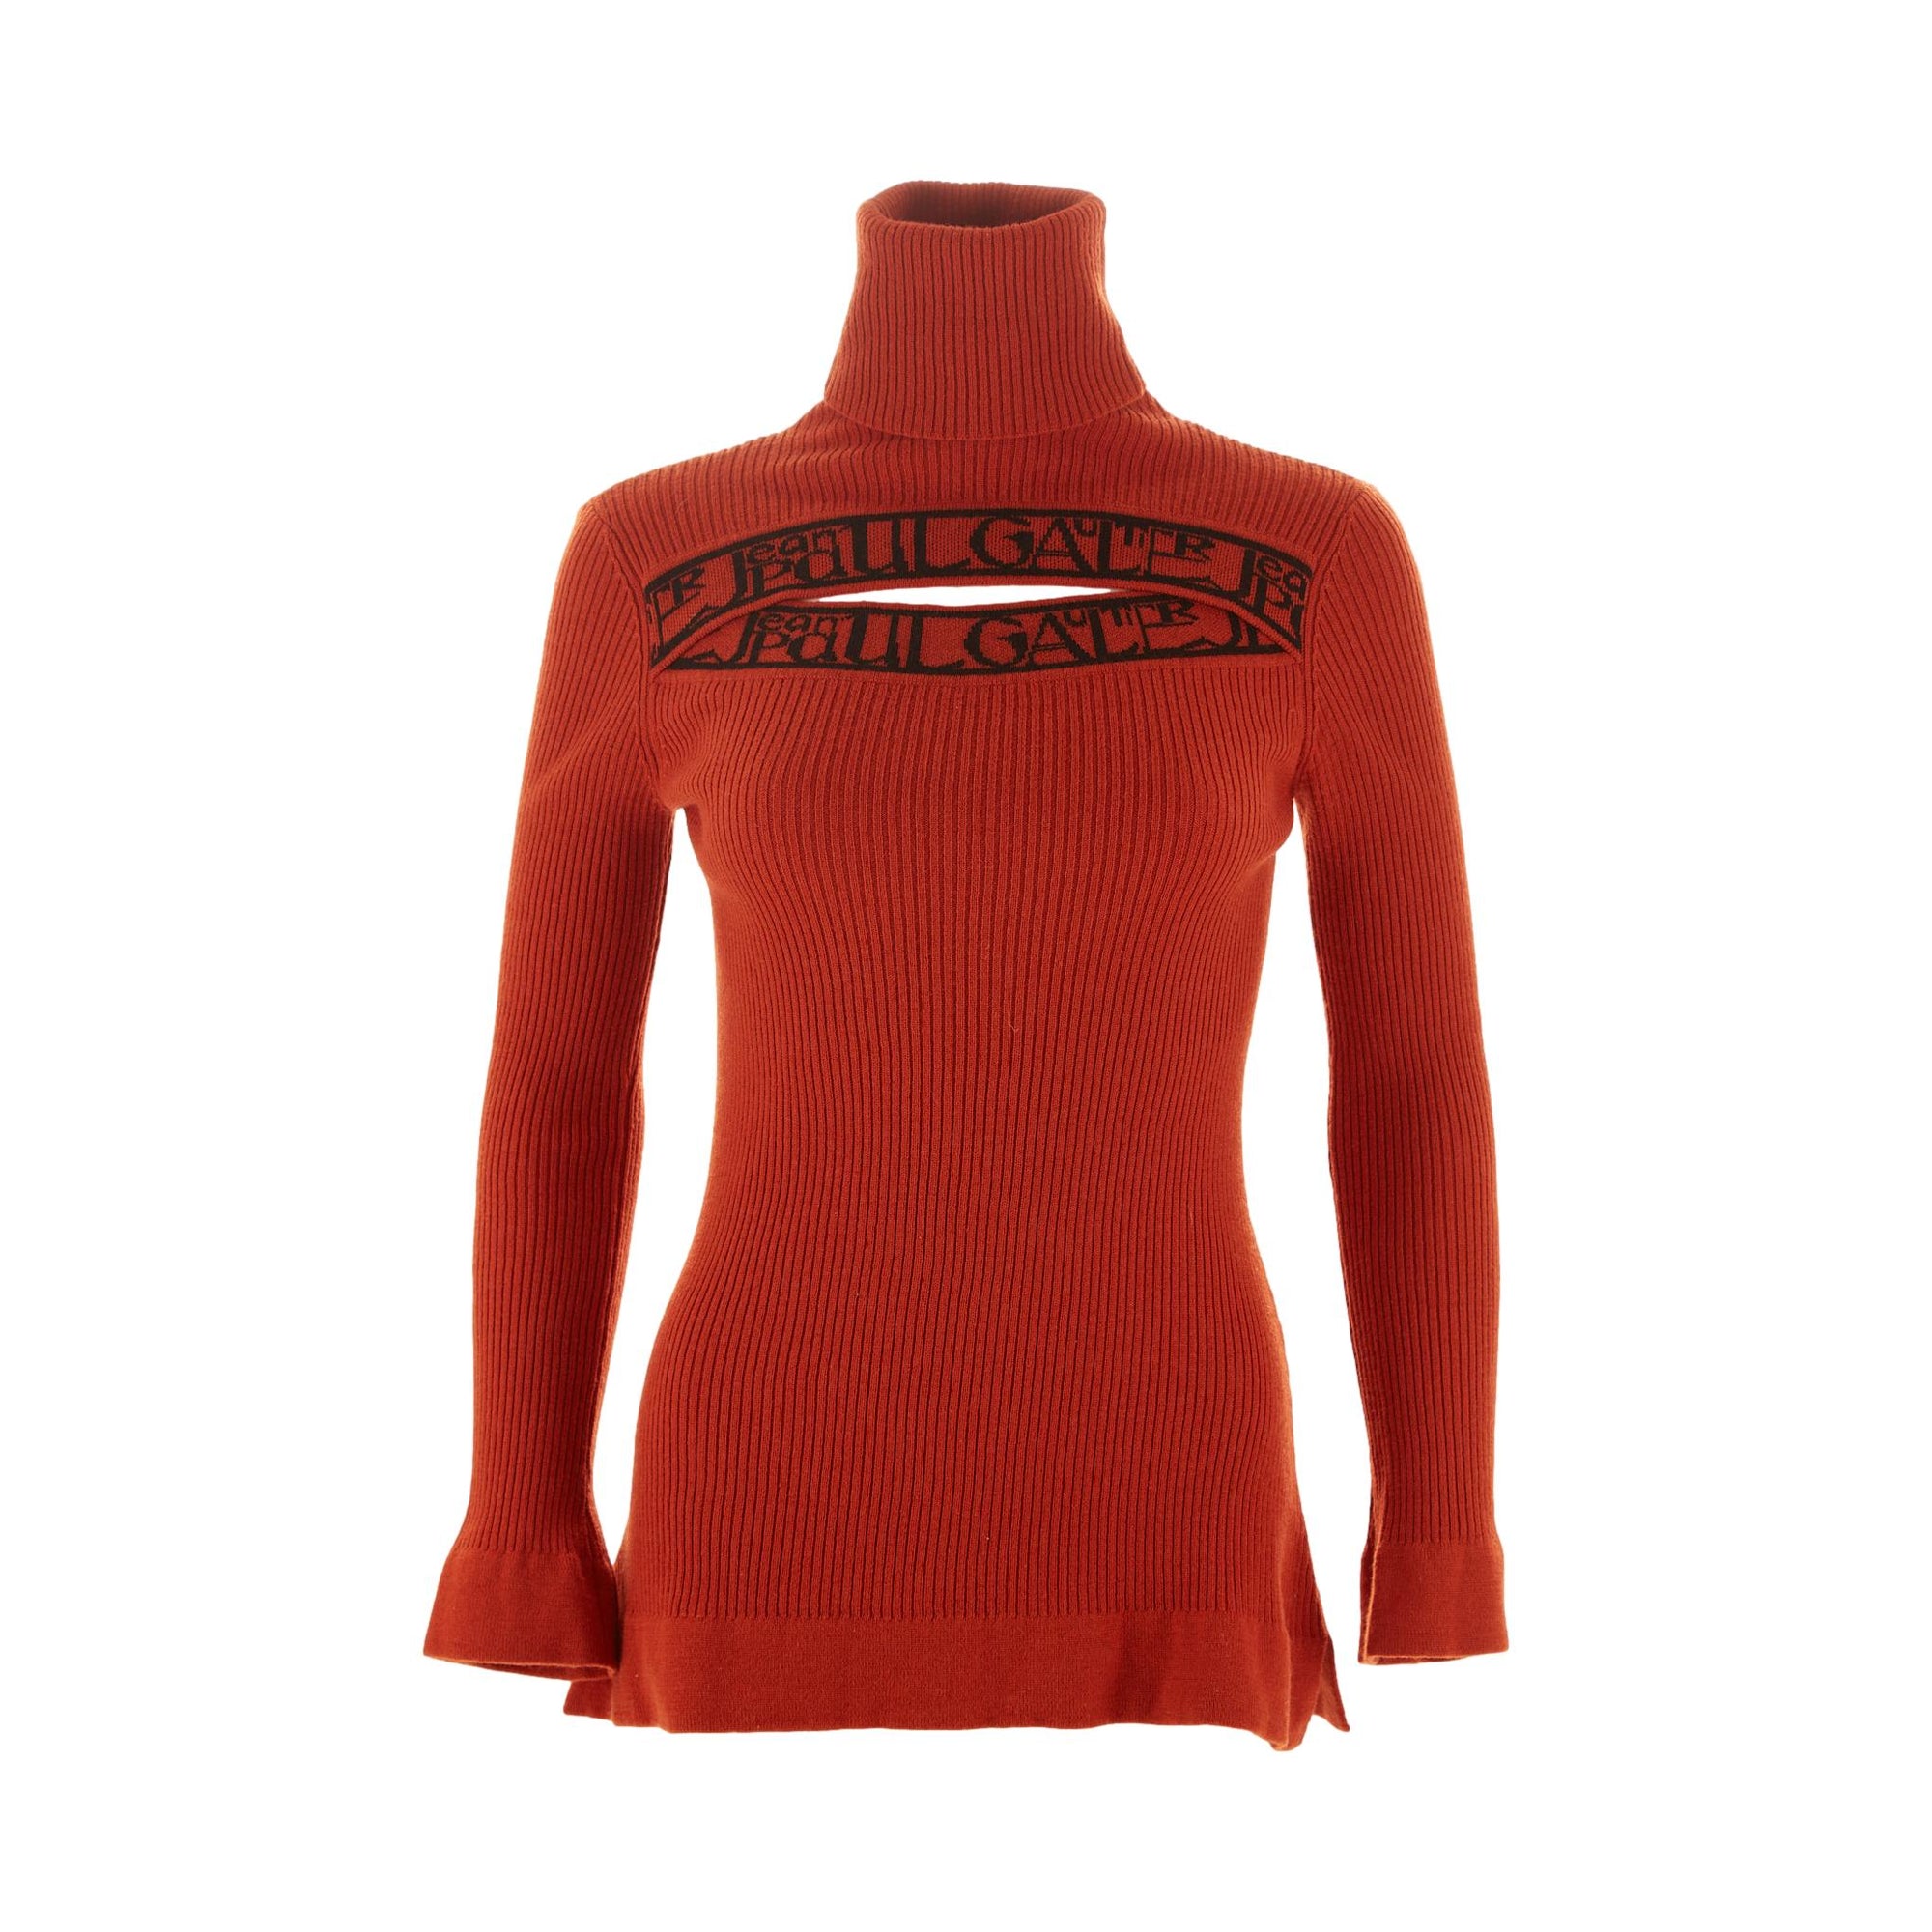 Jean Paul Gaultier Red Cut Out Sweater